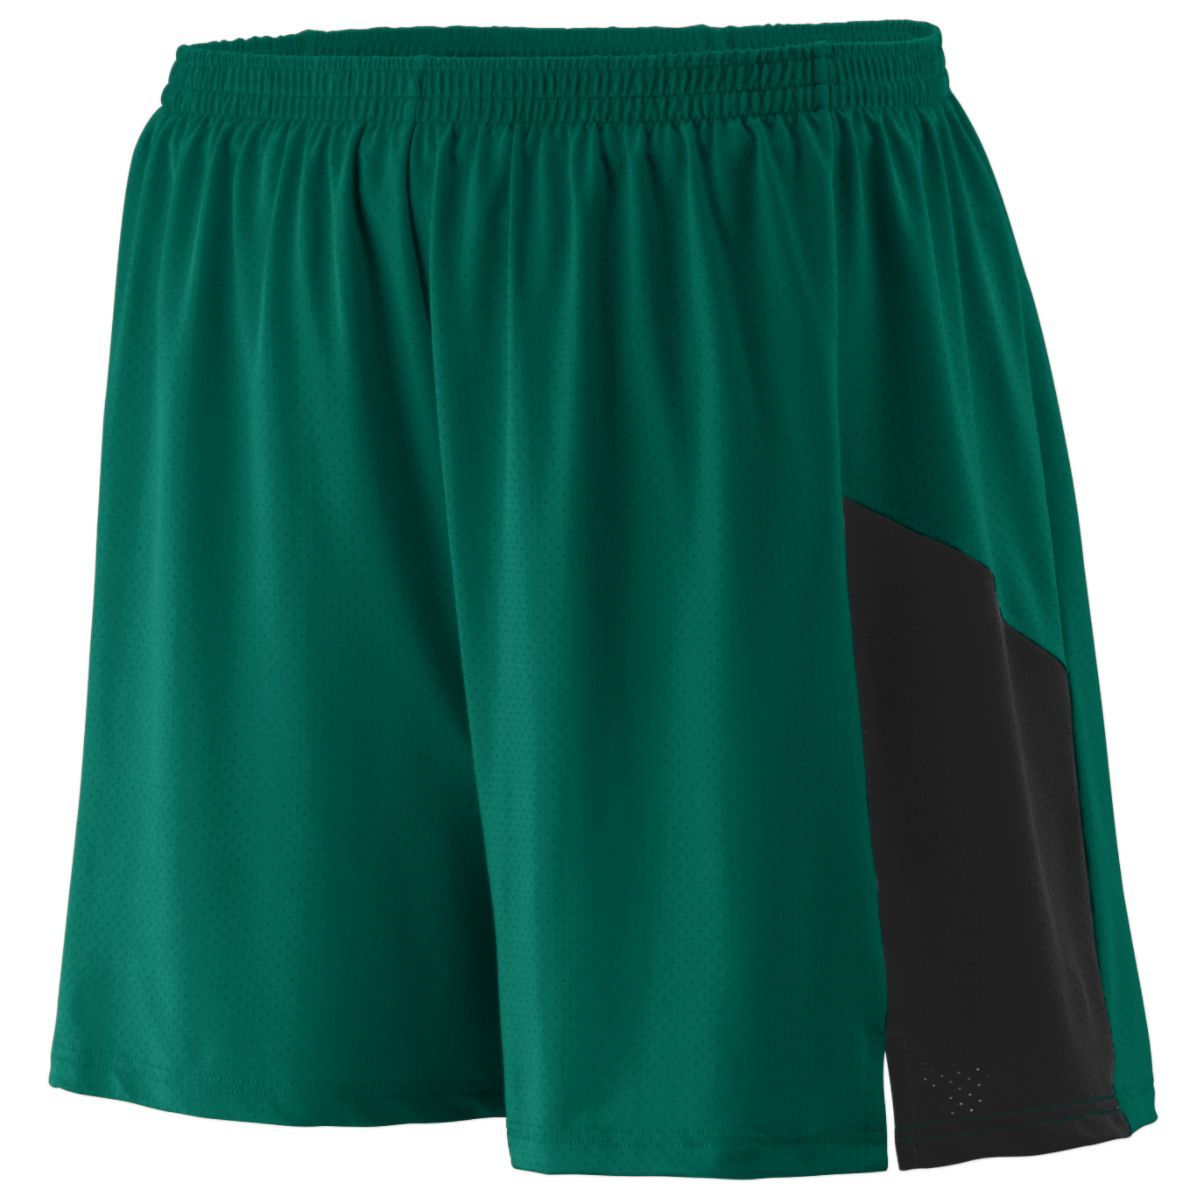 Augusta Sportswear Youth Sprint Shorts in Dark Green/Black  -Part of the Youth, Youth-Shorts, Augusta-Products, Track-Field product lines at KanaleyCreations.com